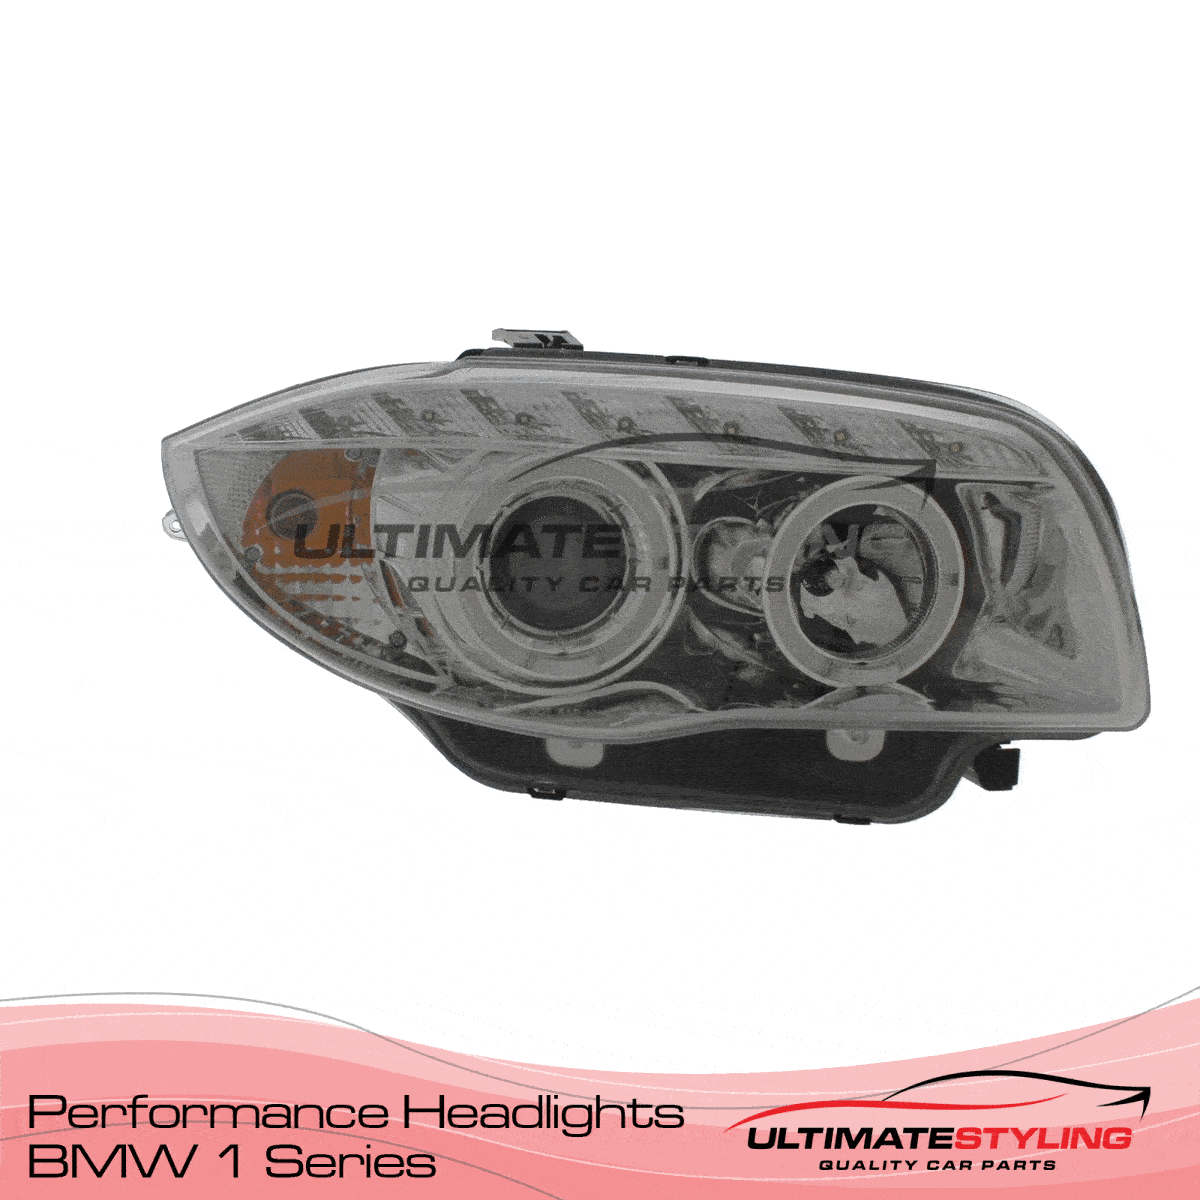 360 view of a BMW 1 Series aftermarket headlight upgrade